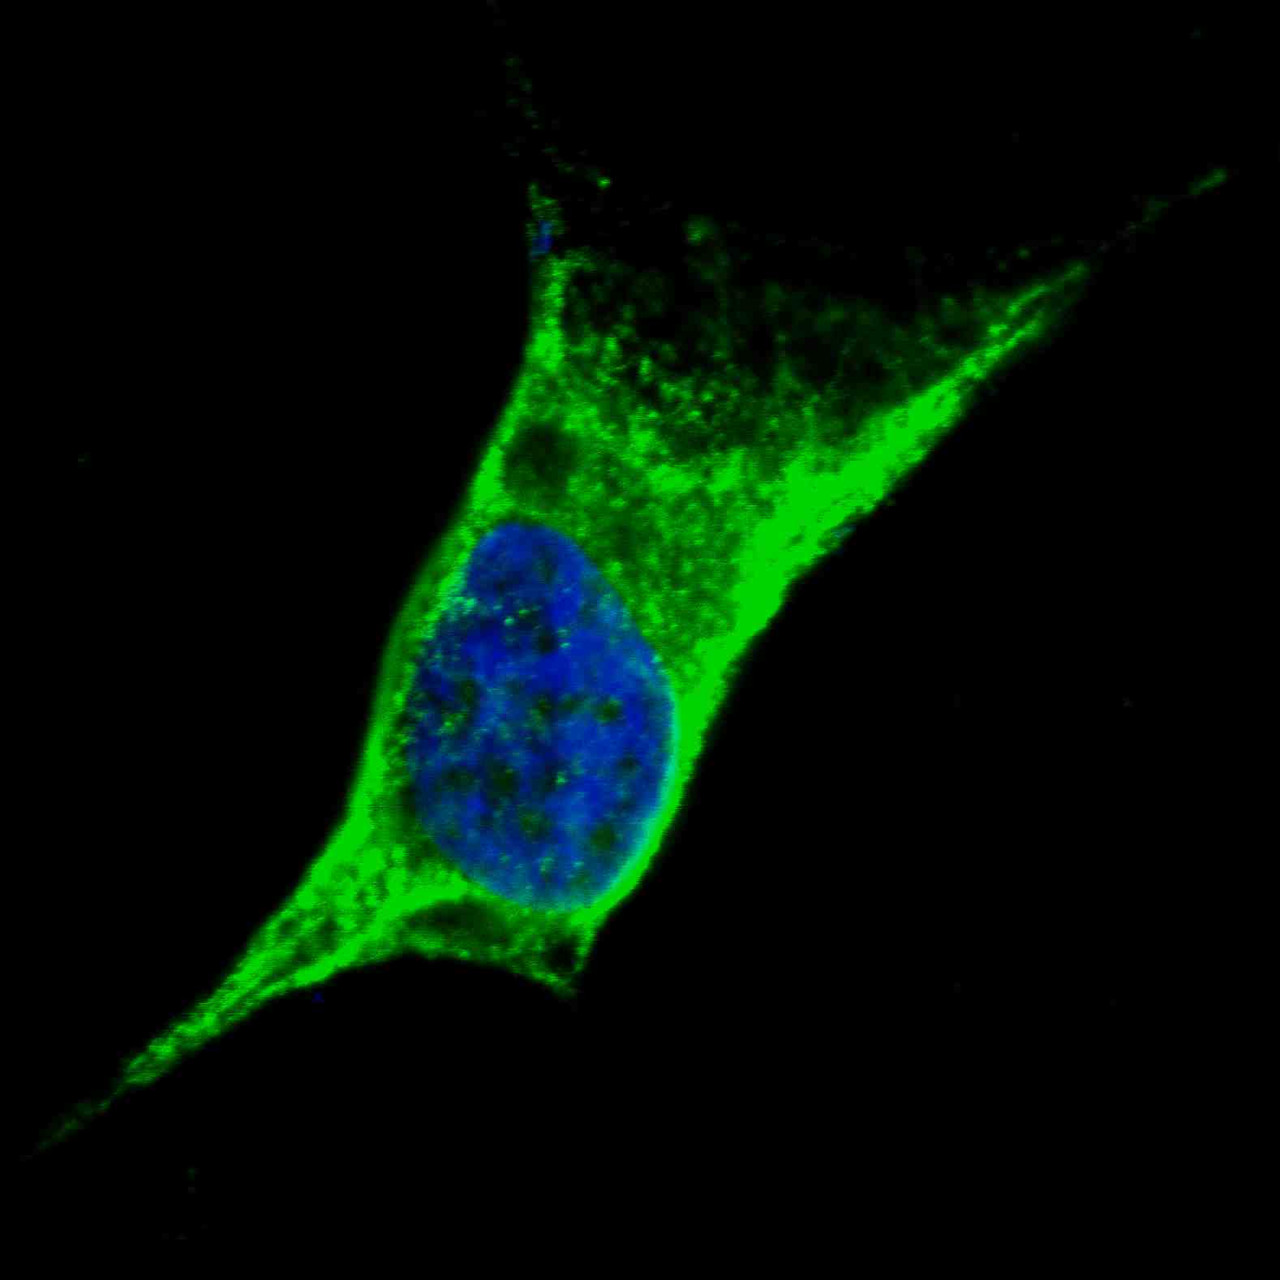 Fluorescent confocal image of SY5Y cells stained with Vimentin antibody. SY5Y cells were fixed with 4% PFA (20 min) , permeabilized with Triton X-100 (0.2%, 30 min) . Cells were then incubated with Antibody Vimentin primary antibody (1:100, 2 h at room temperature) . For secondary antibody, Alexa Fluor 488 conjugated donkey anti-rabbit antibody (green) was used (1:1000, 1h) . Nuclei were counterstained with Hoechst 33342 (blue) (10 ug/ml, 5 min) . Note the highly specific localization of the Vimentin immunosignal to the cytoskeleton, supported by Human Protein Atlas Data (http://www.proteinatlas.org/ENSG00000026025) .